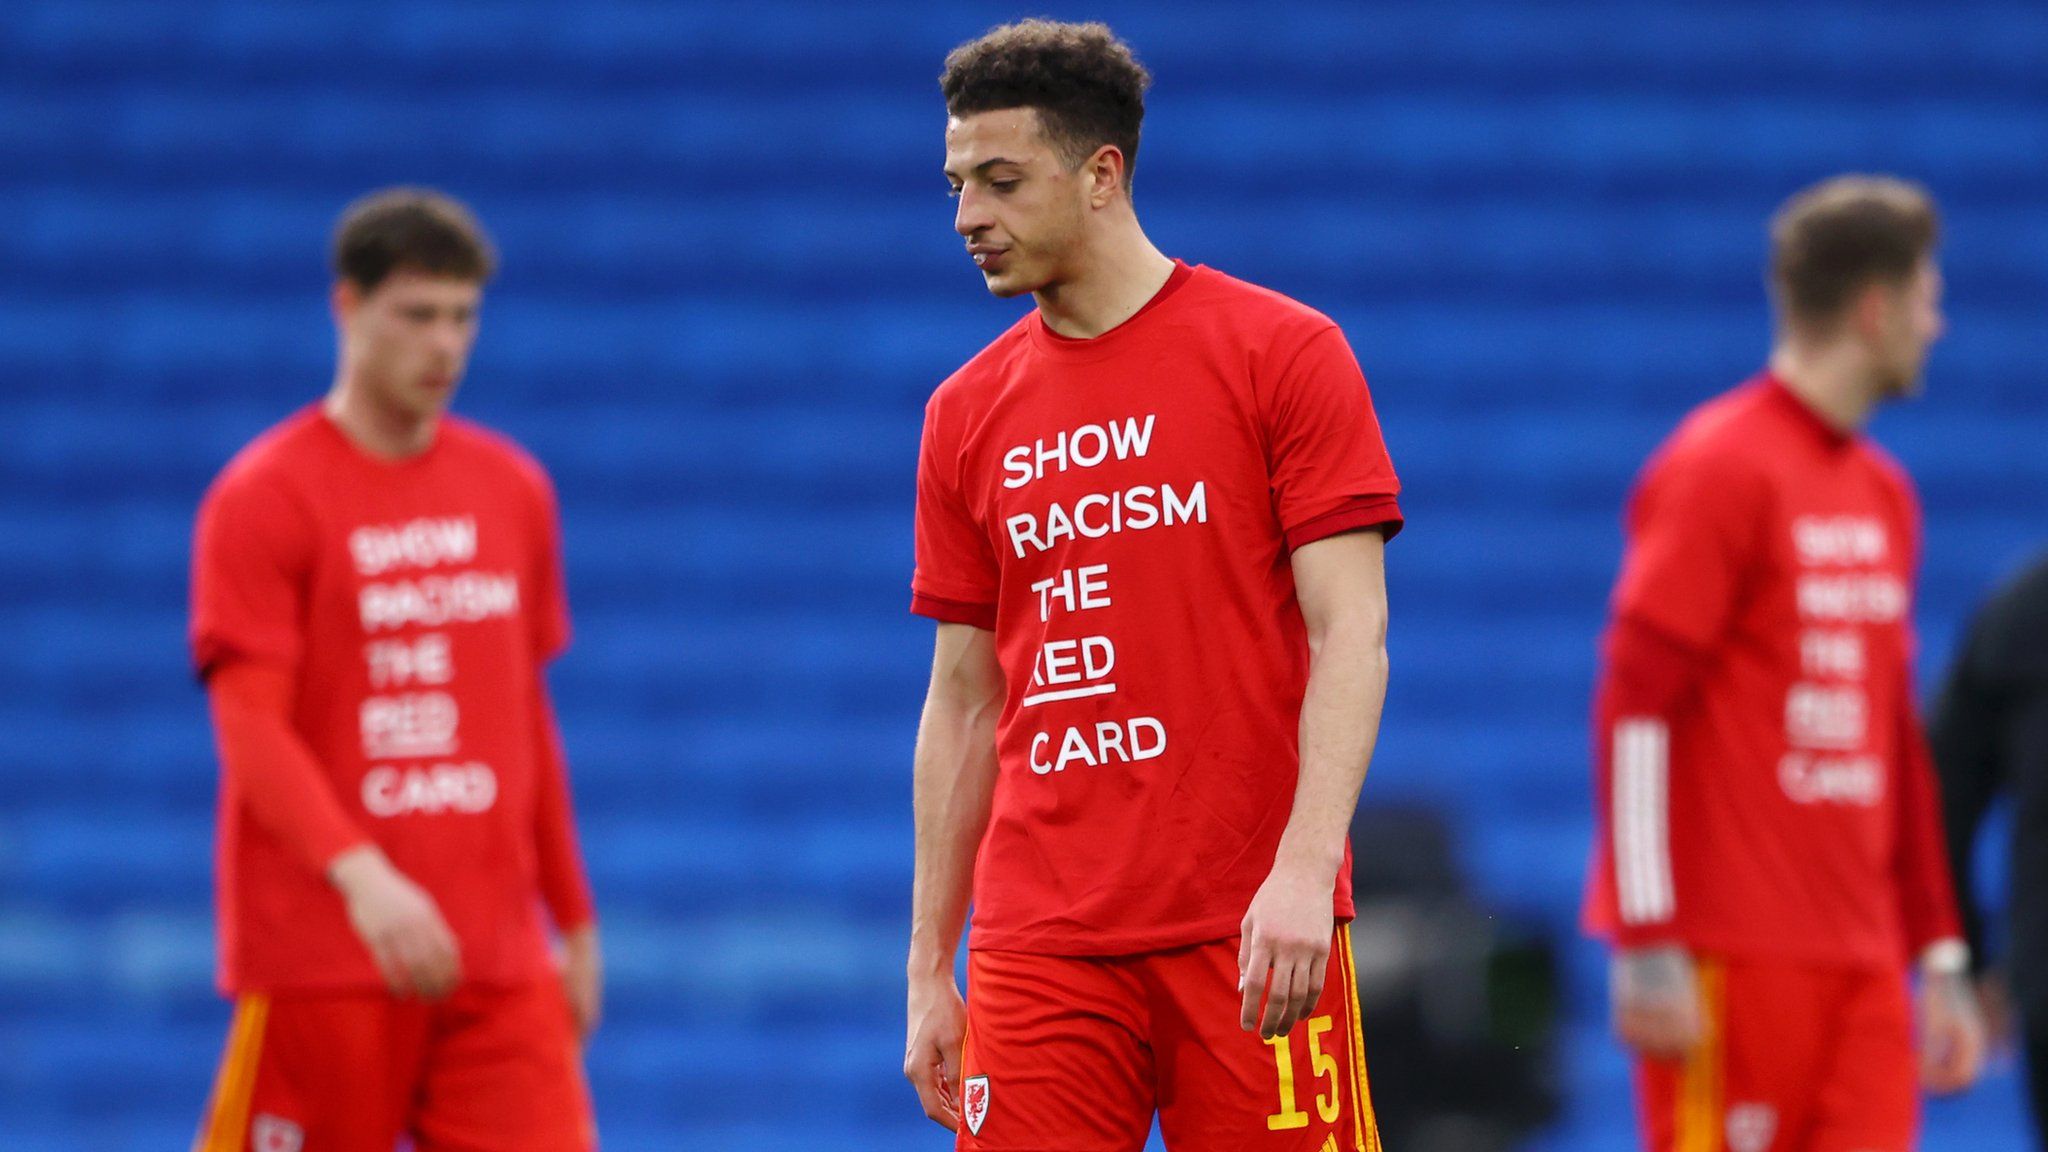 Ethan Ampadu wearing a T-shirt emblazoned with Show Racism the Red Card